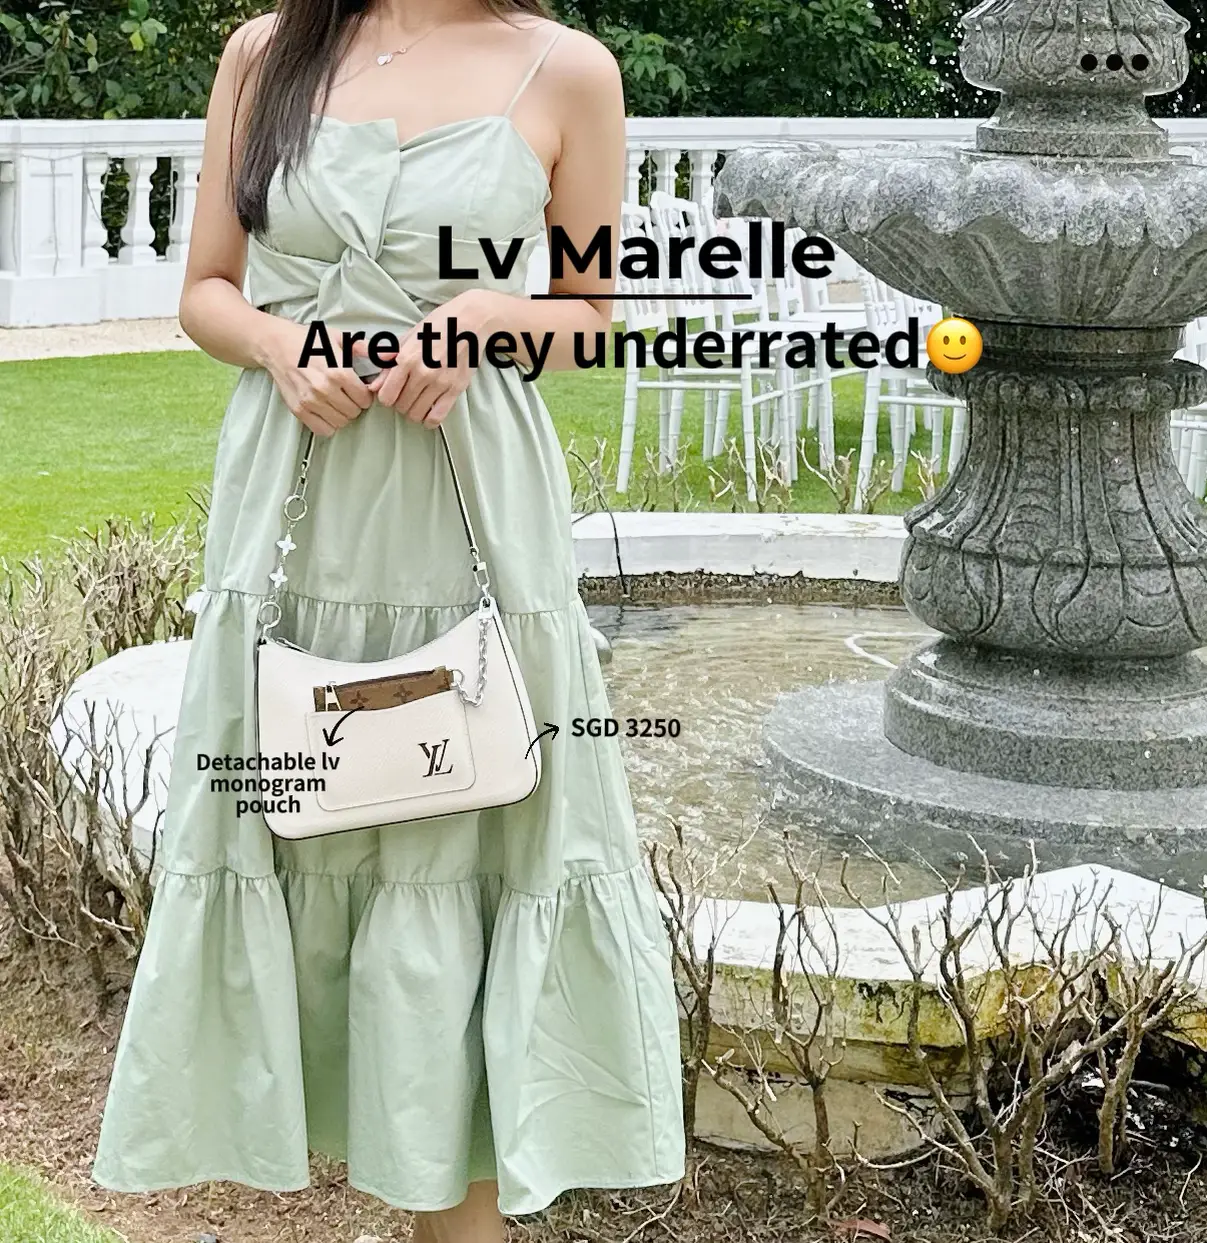 Reviews on the lv marelle bag, Gallery posted by Tan Simyi